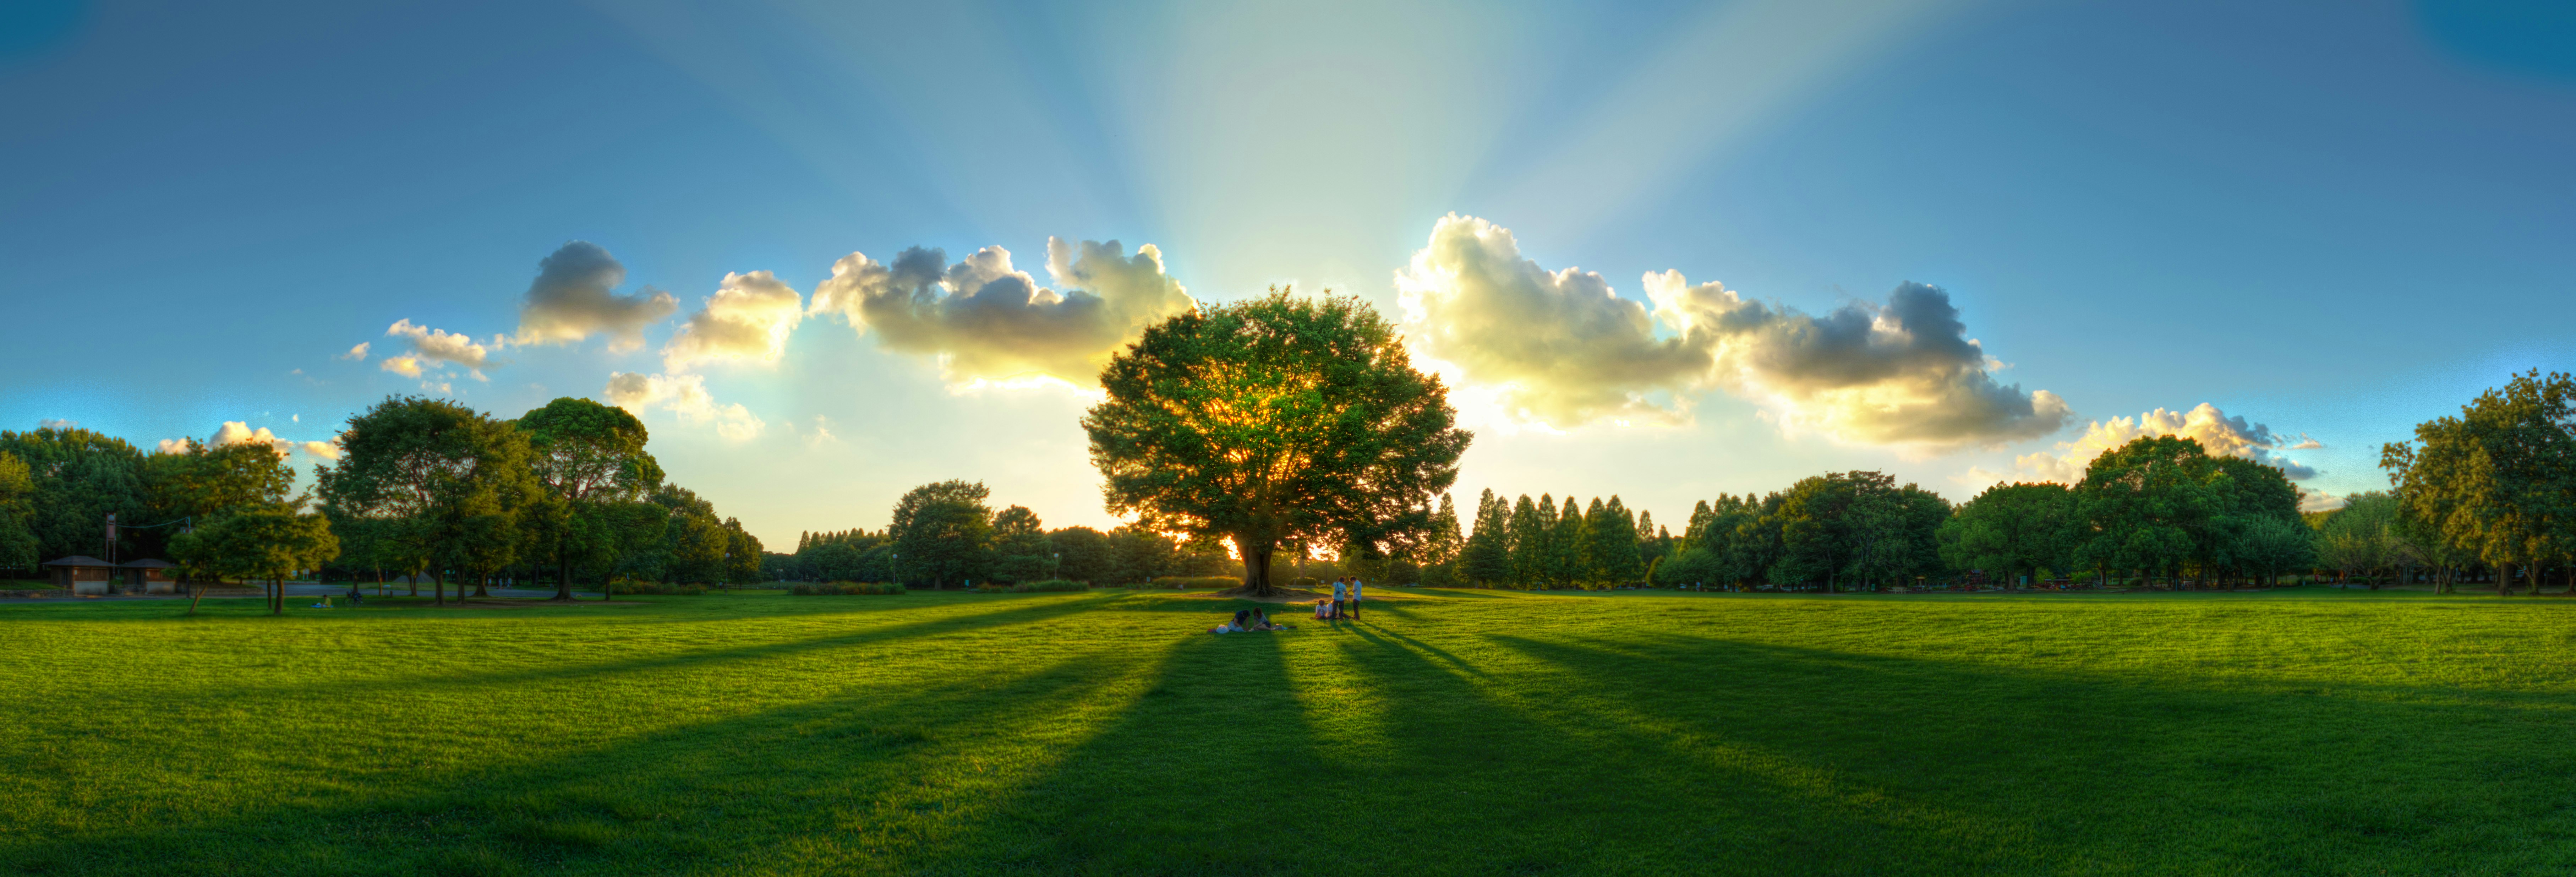 A vibrant image of a lush green park features a large, solitary tree at the center, illuminated by the setting sun. Sunlight beams radiate through the tree's branches, casting long shadows on the grassy field. The sky is clear with scattered clouds.